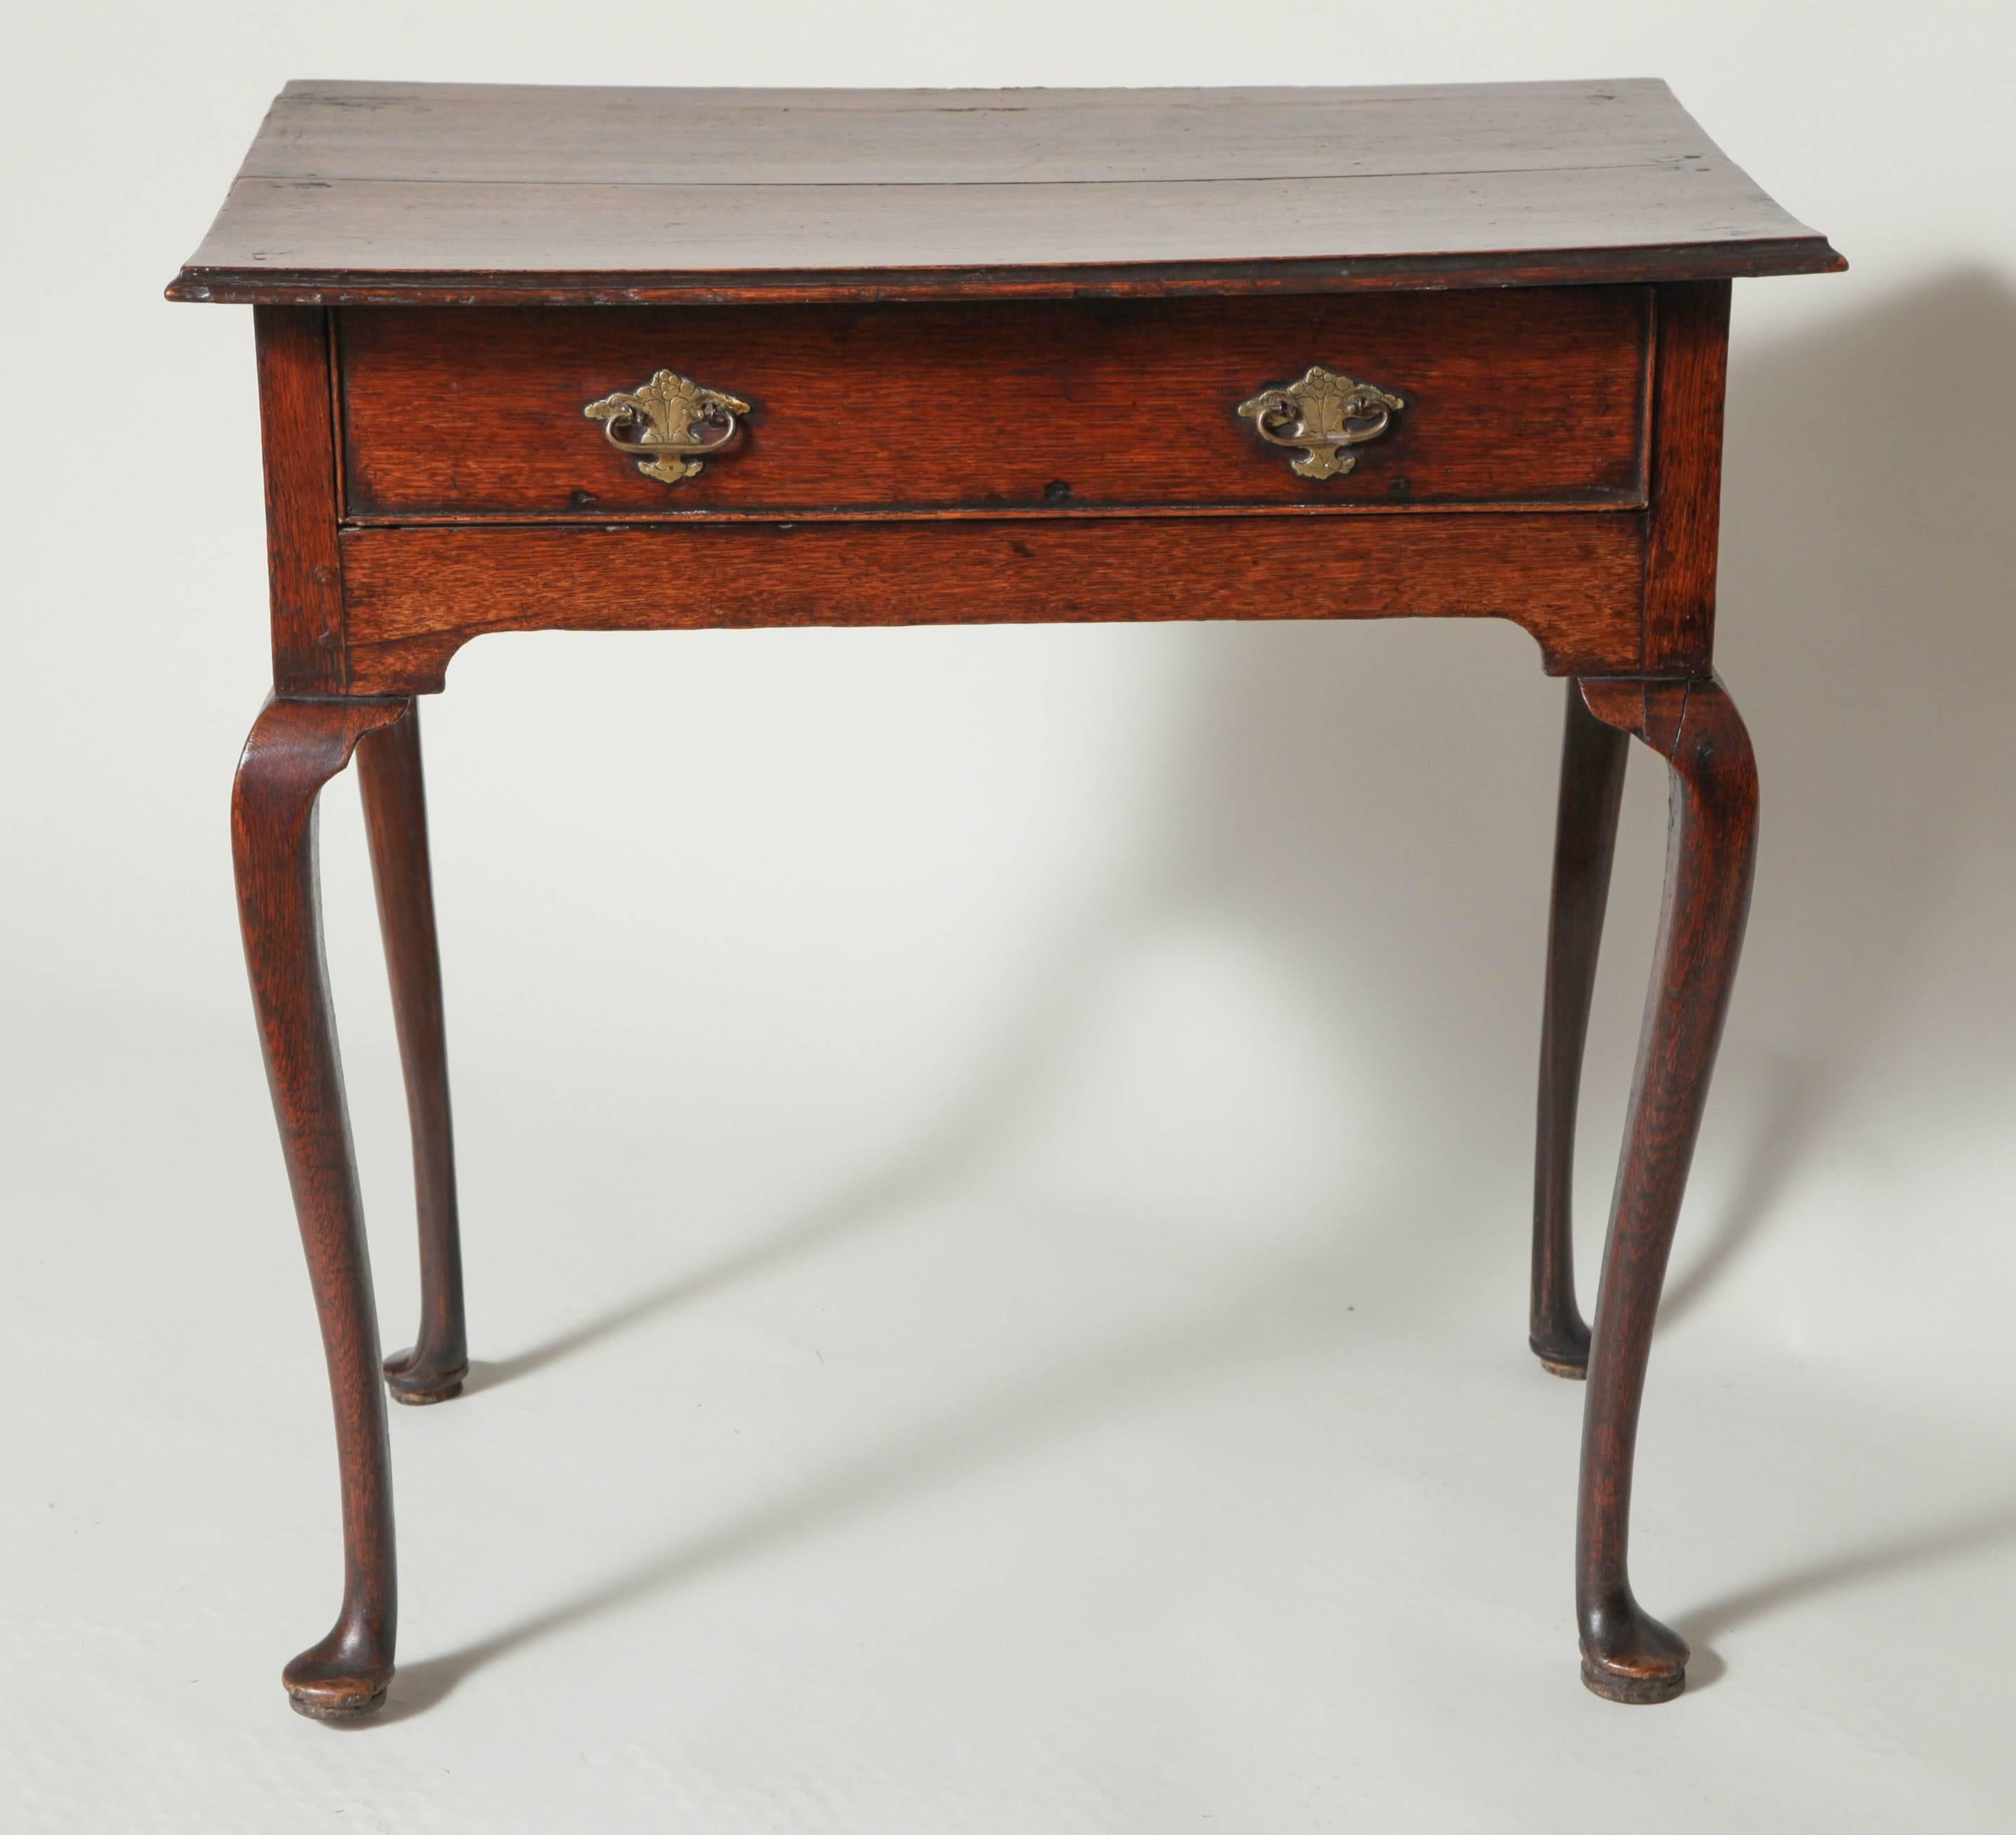 Graceful 18th century English oak Queen Anne table, with ogee molded top over single drawer retaining original etched brass hardware, over shaped apron and standing on elegant cabriole legs ending in pad feet, the whole with good rich color and